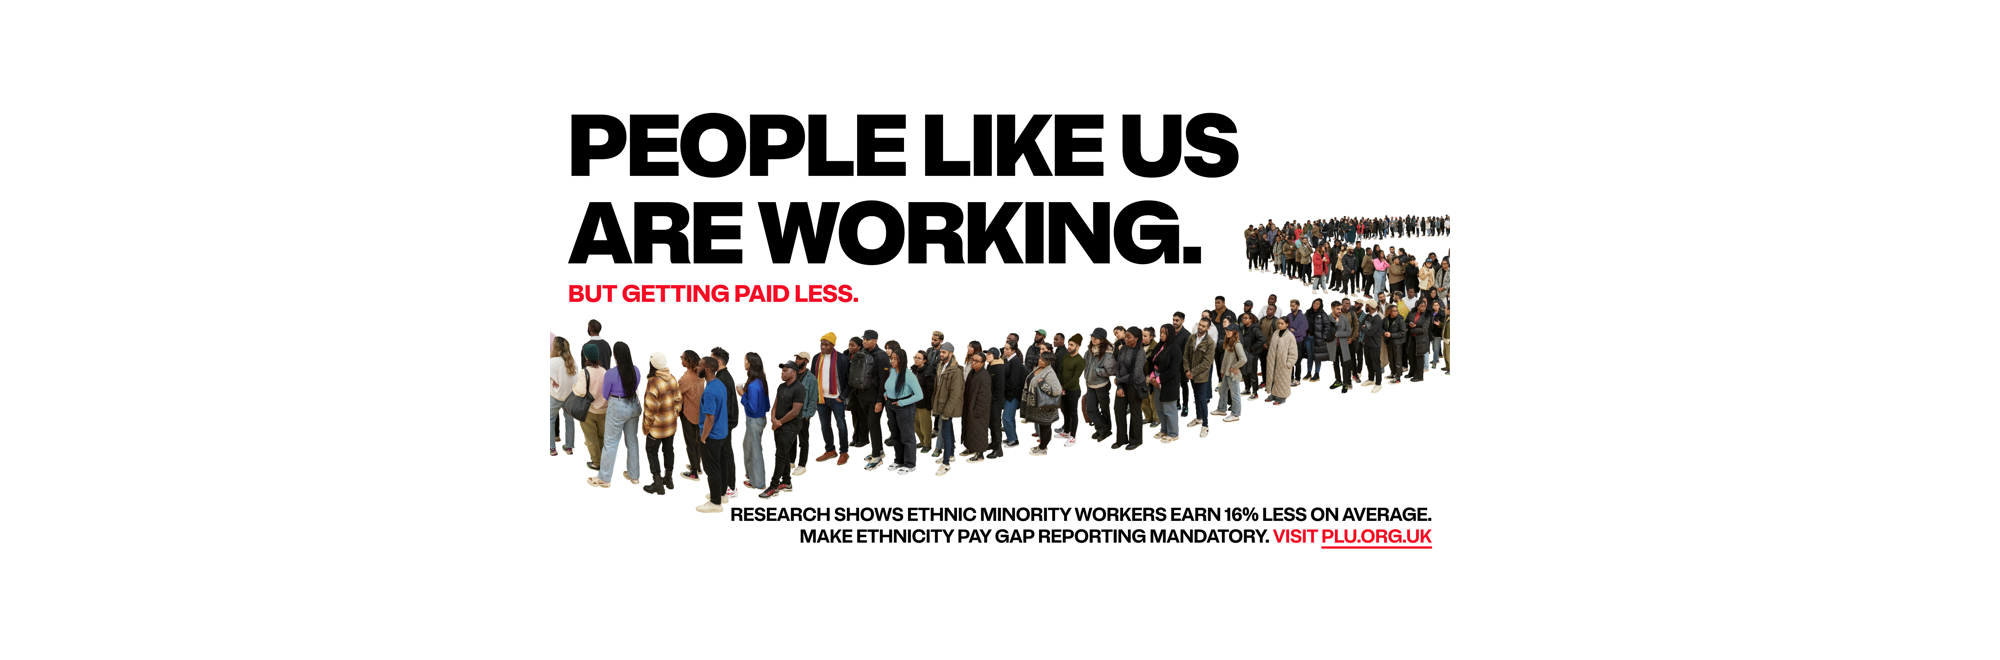 Iconic ‘Labour isn’t working’ advert reimagined to show ethnicity pay gap